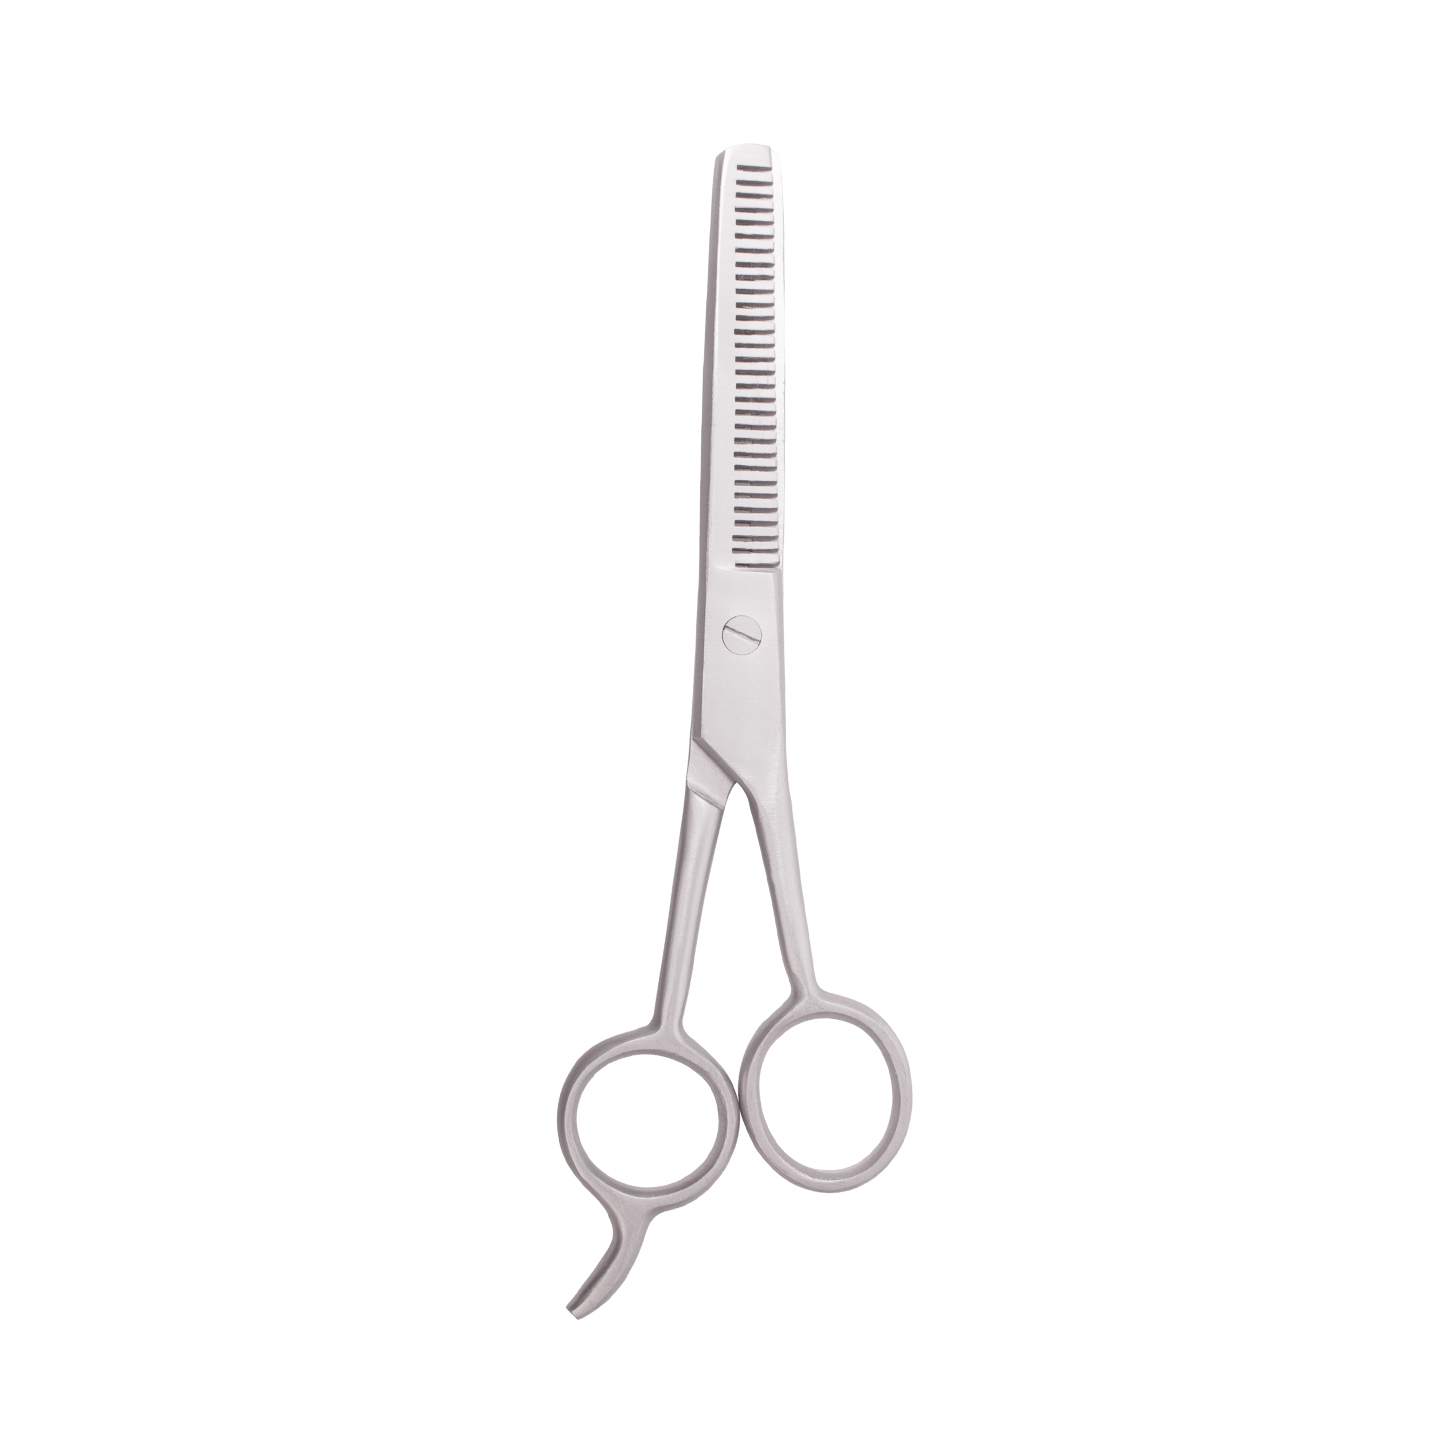 hair clippers and thinning scissors